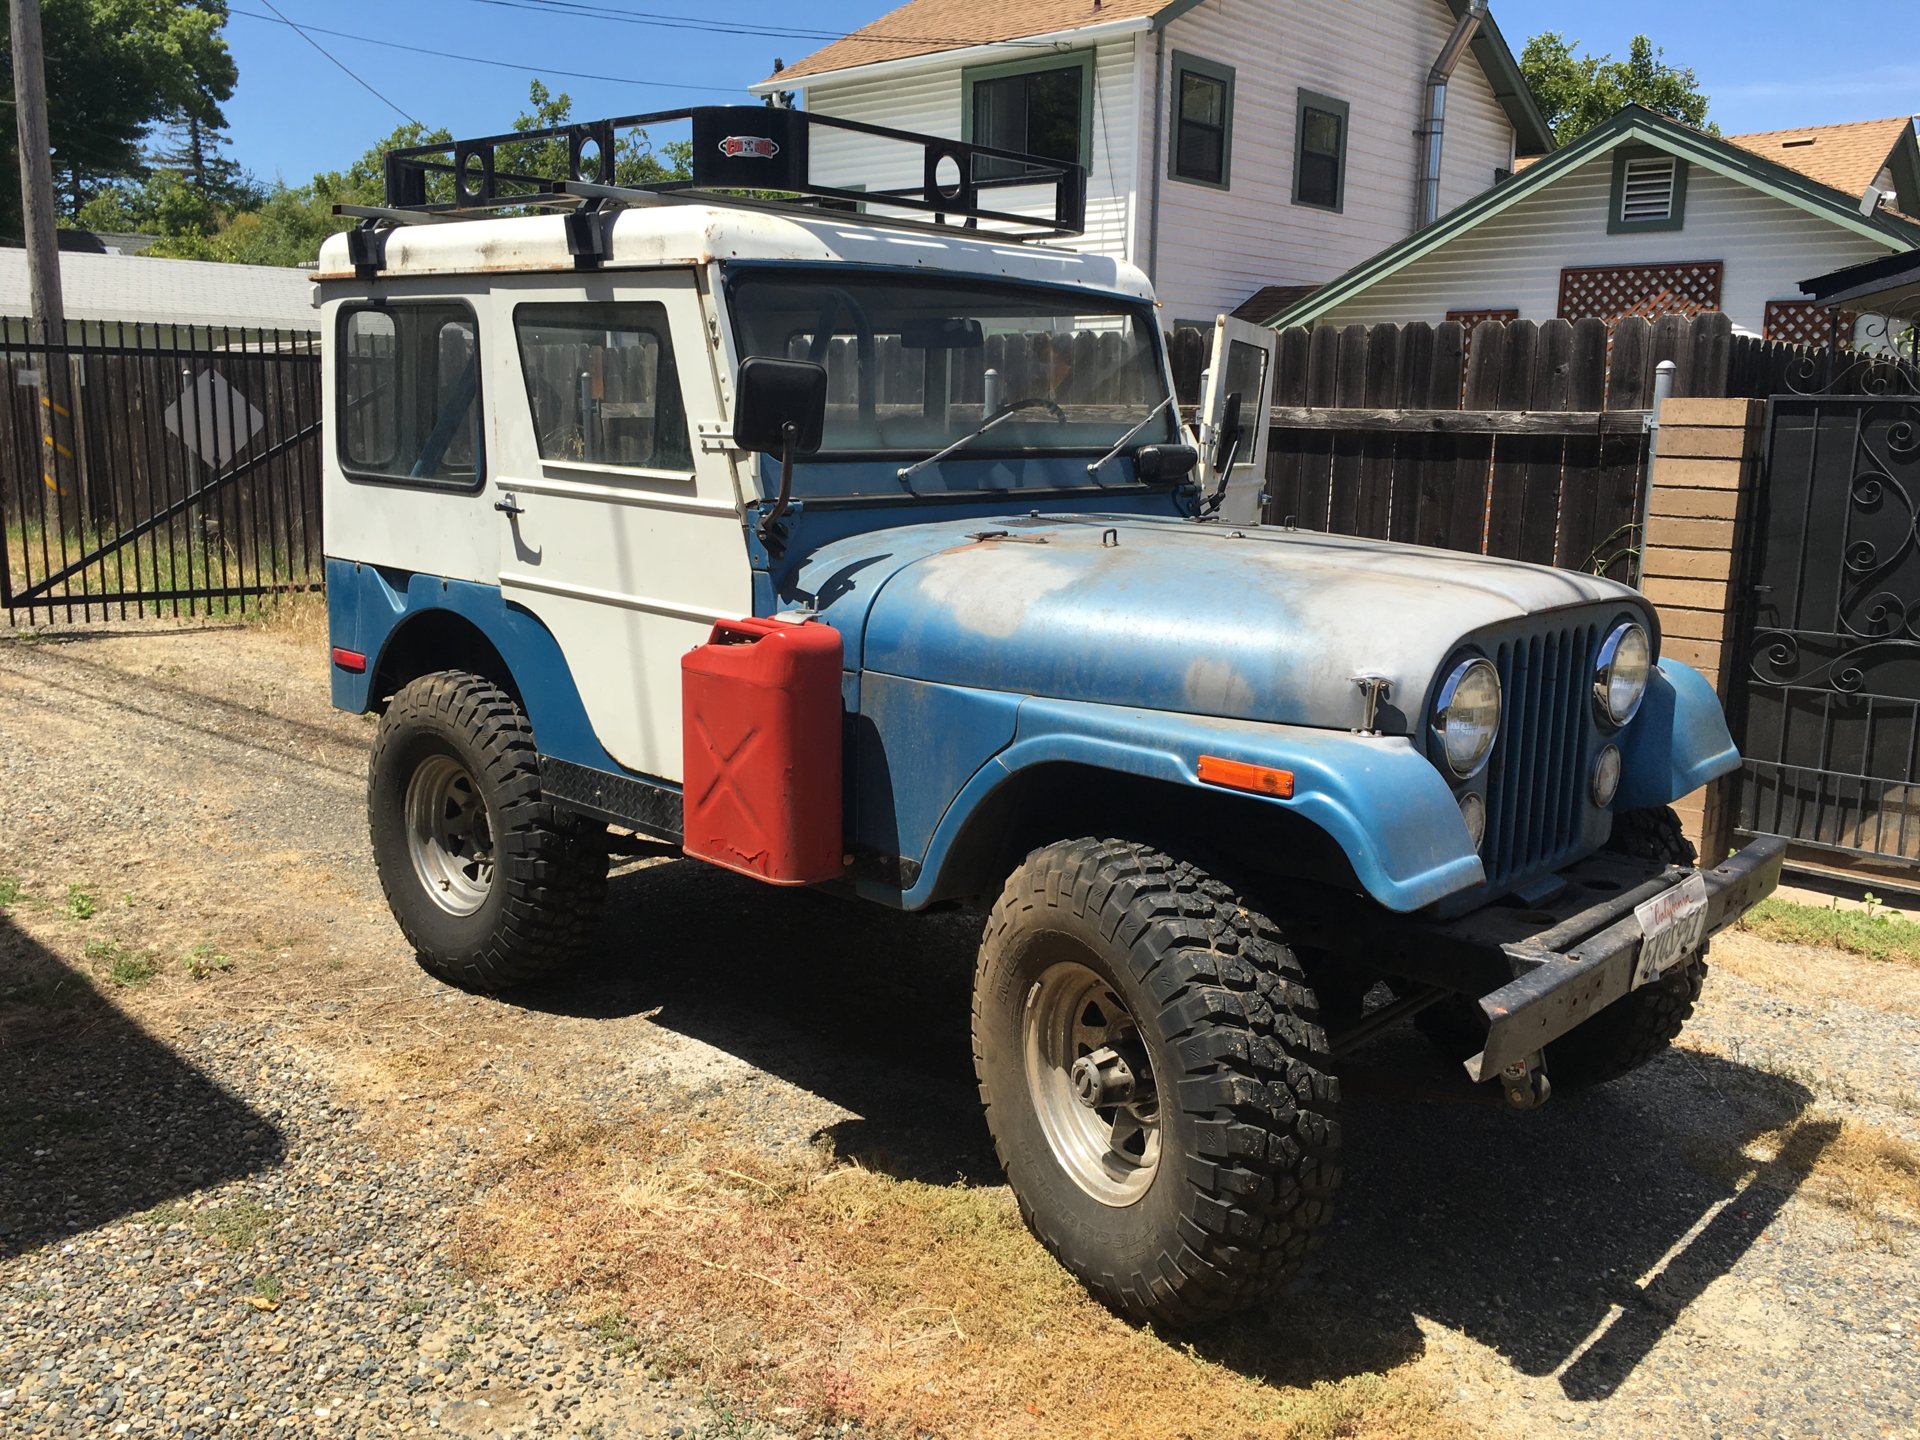 1974 Stock CJ5 - Bought in 2011 as a project, became daily driver, no off-r...